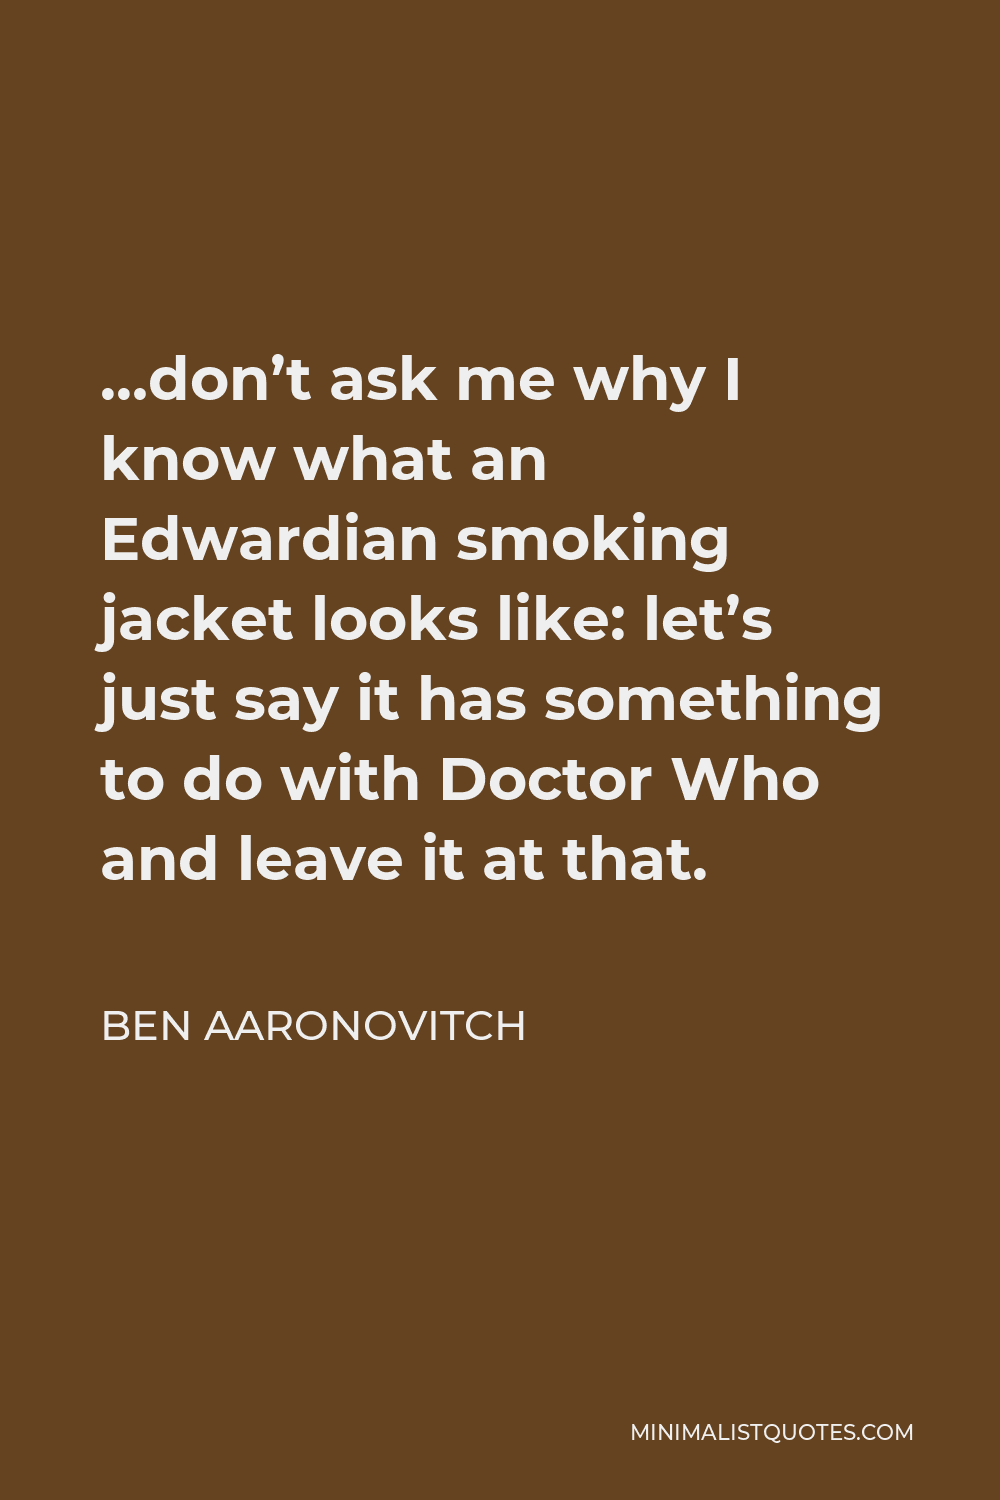 Ben Aaronovitch Quote - …don’t ask me why I know what an Edwardian smoking jacket looks like: let’s just say it has something to do with Doctor Who and leave it at that.